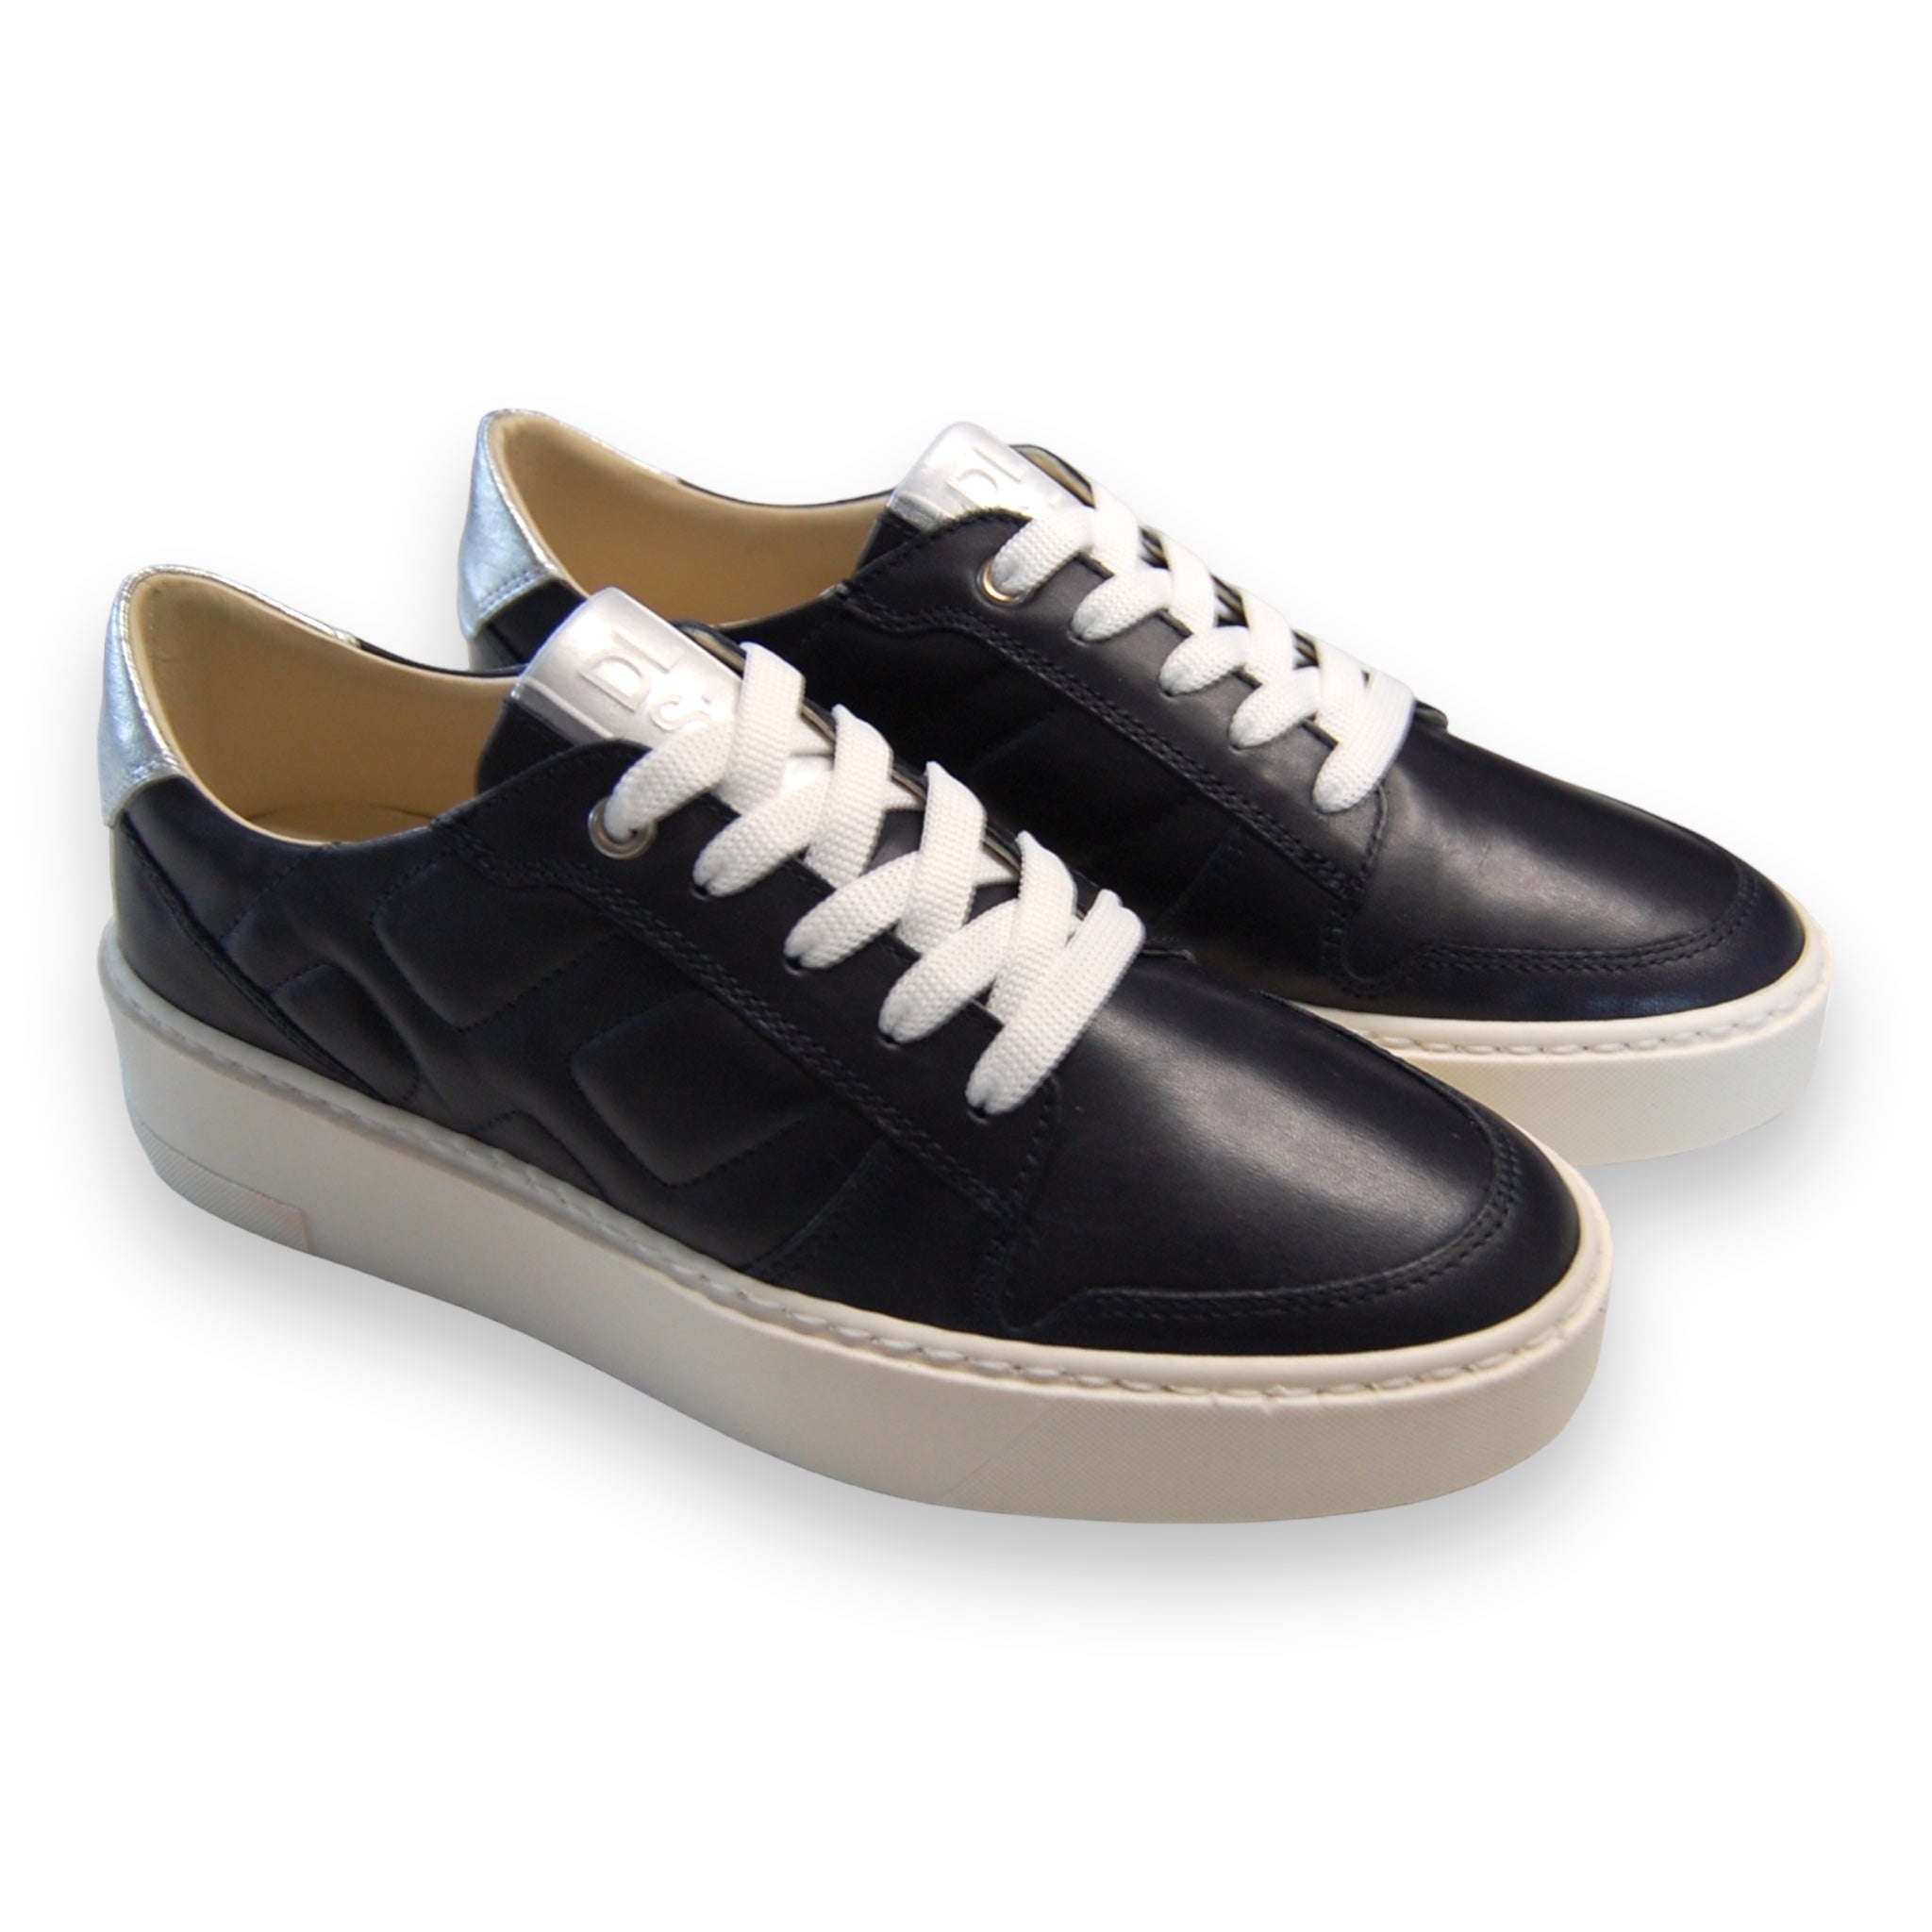 DL Sport Quilted Leather Sneaker Navy style 5608-pair